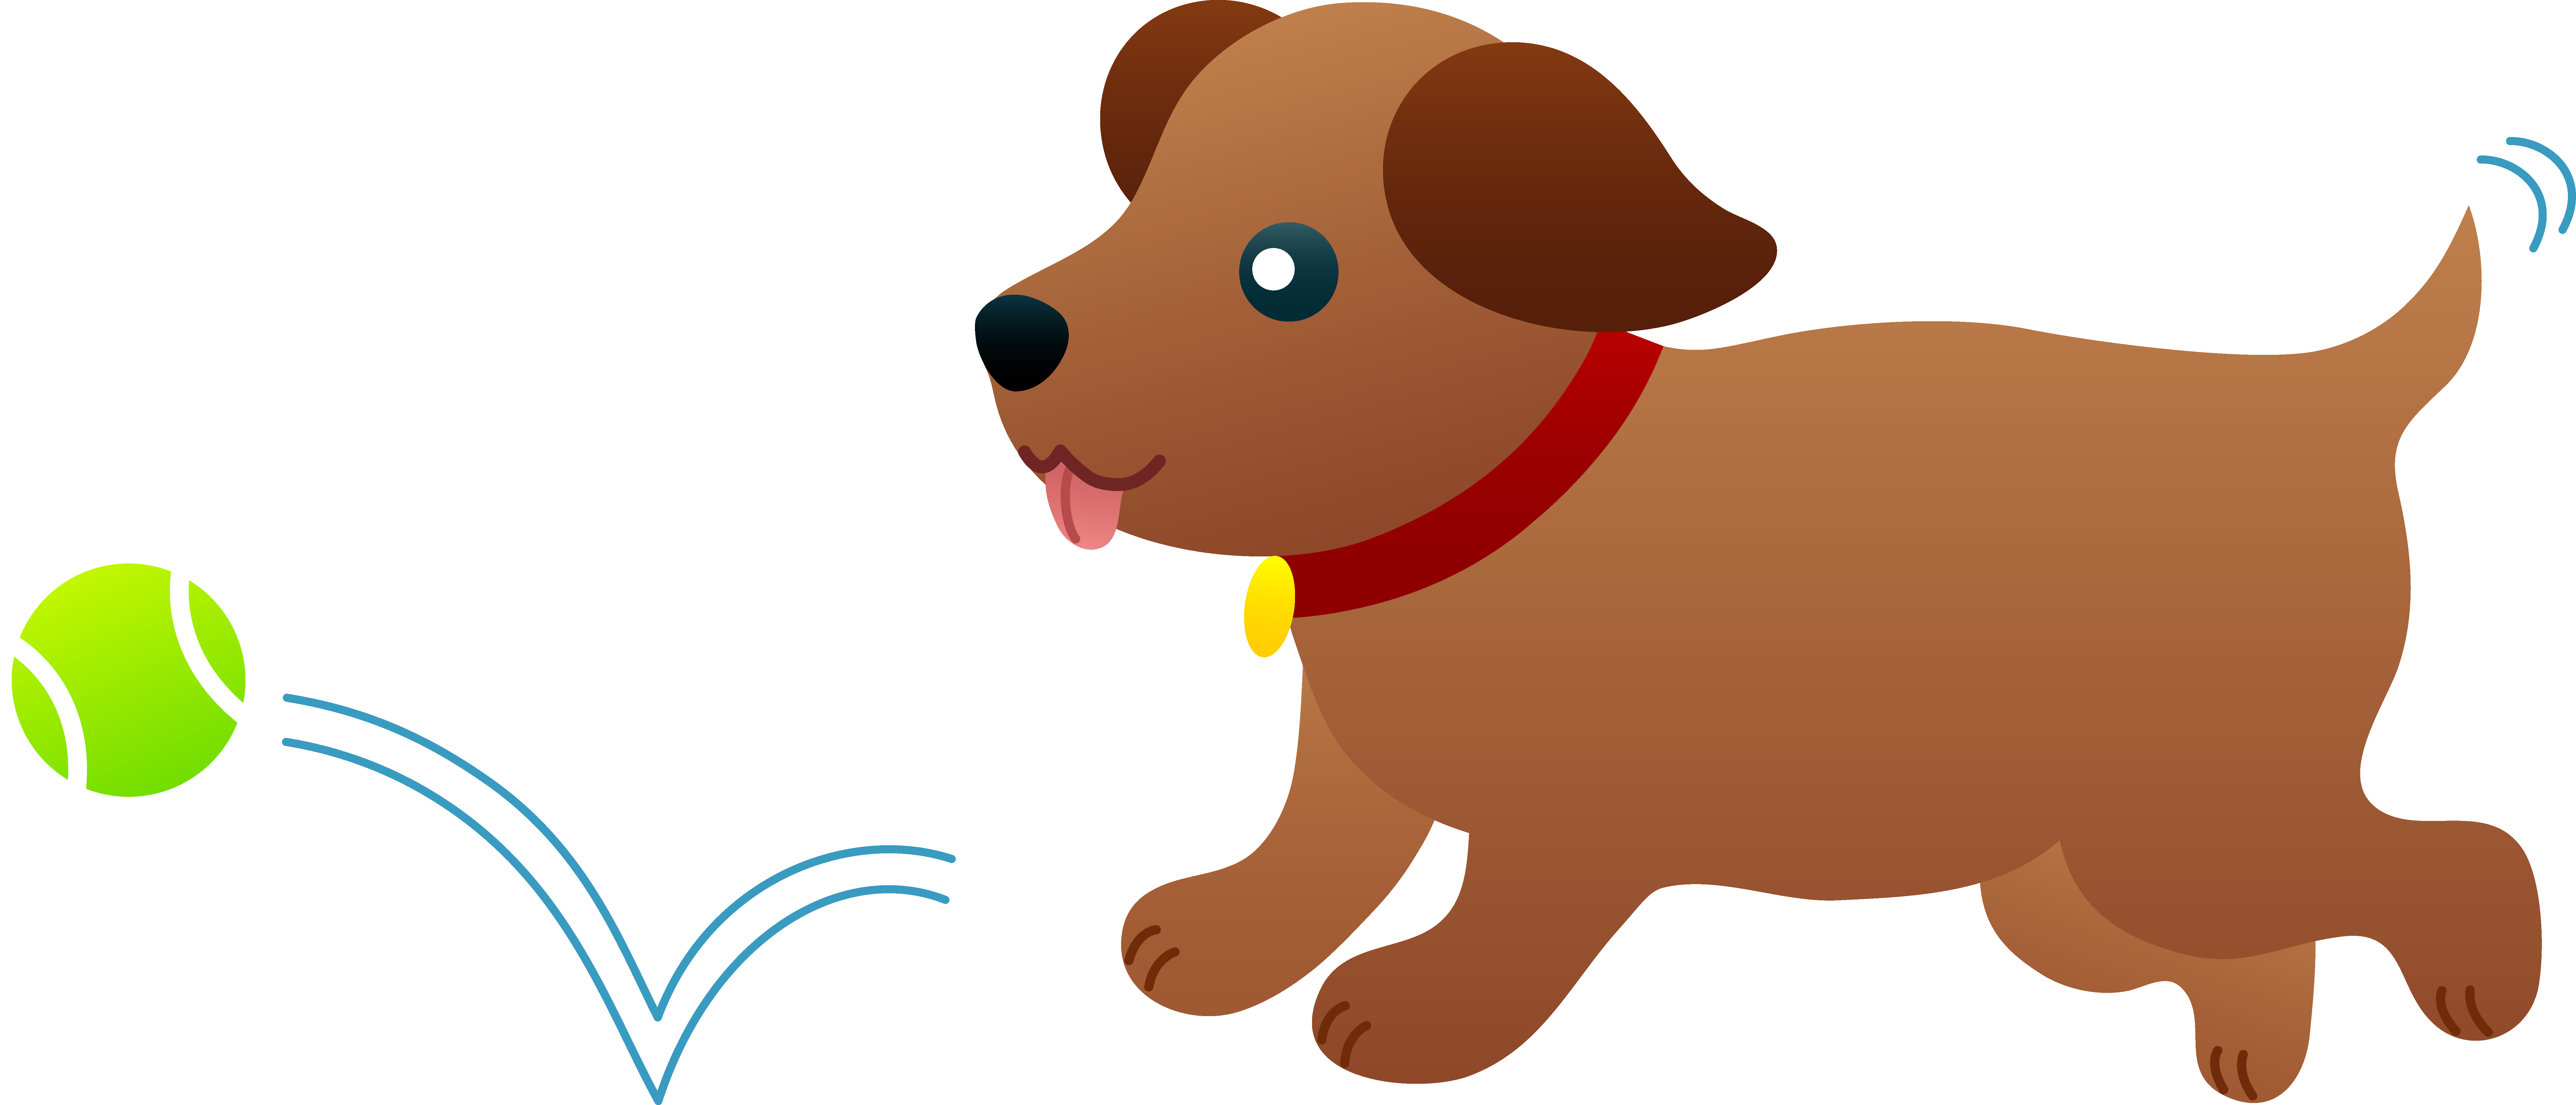 Puppy chasing after ball free clip art